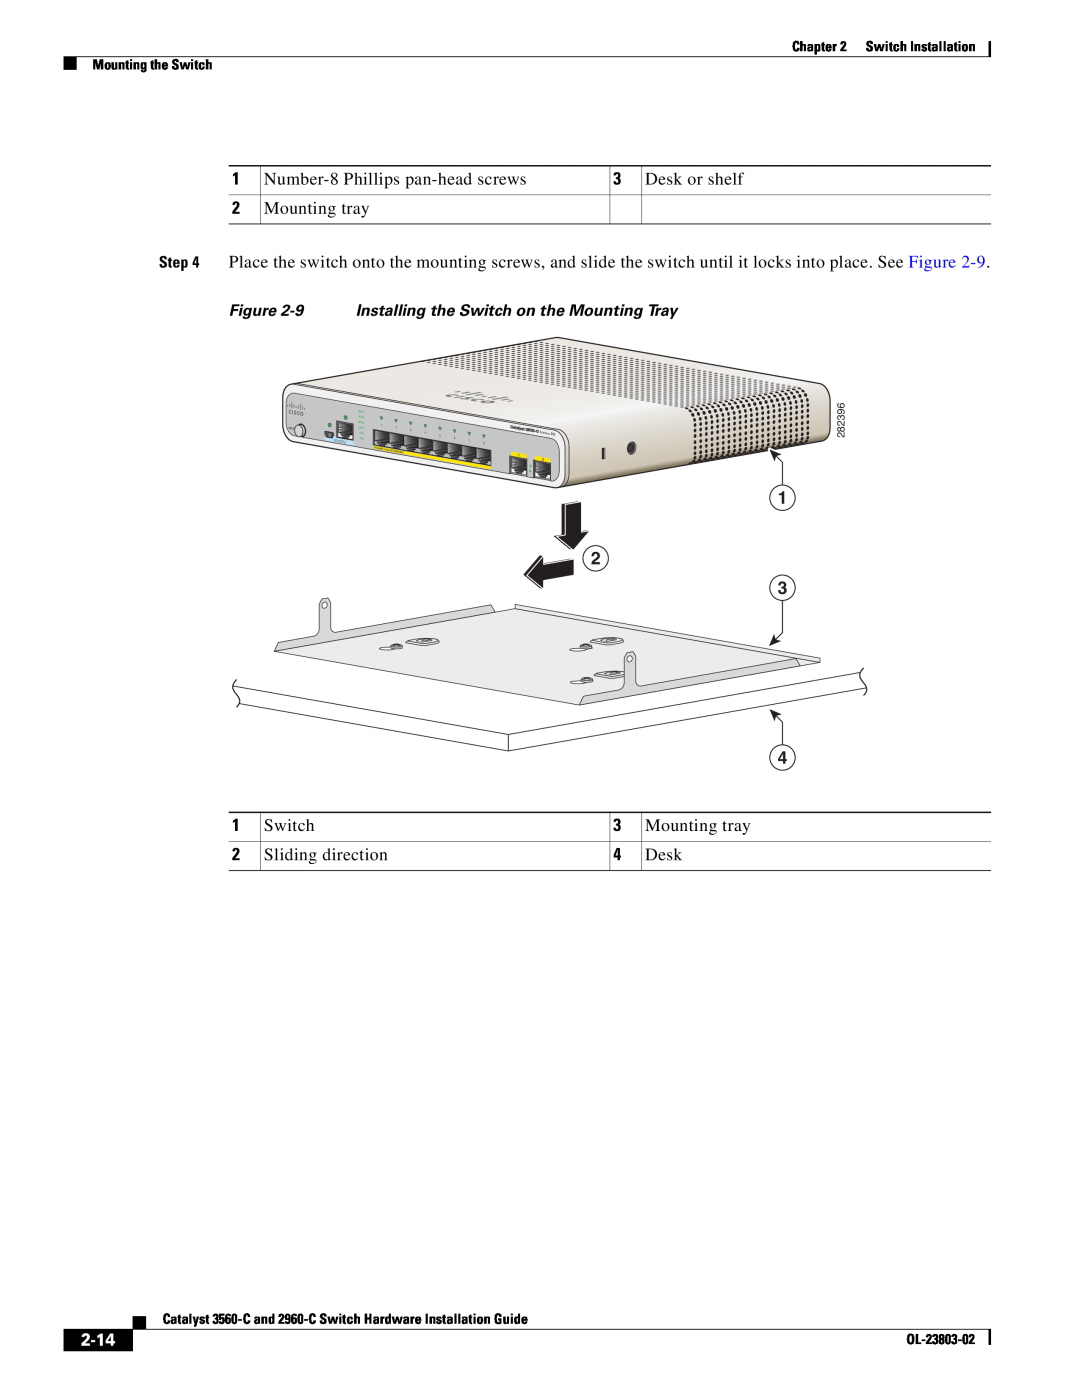 Cisco Systems 3560-C manual 2-14, 9 Installing the Switch on the Mounting Tray 